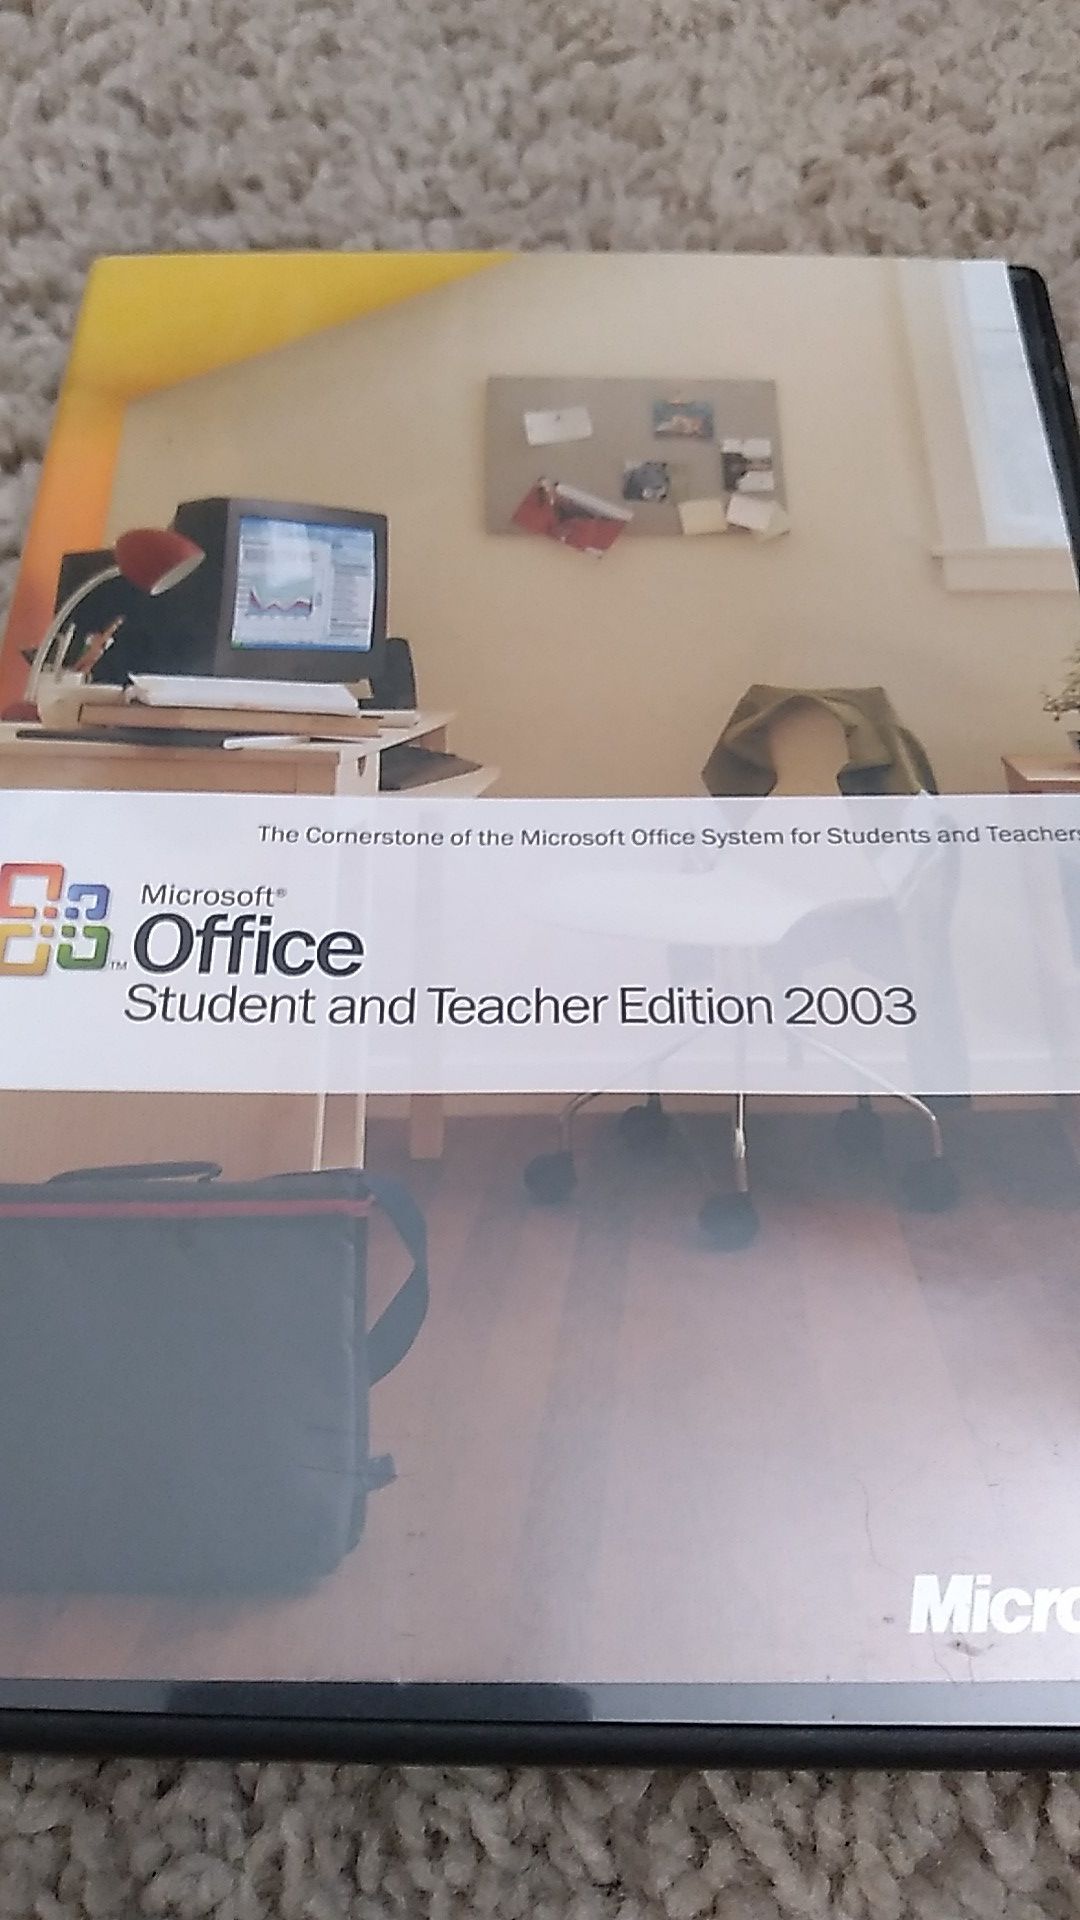 Microsoft Office student and teacher edition 2003